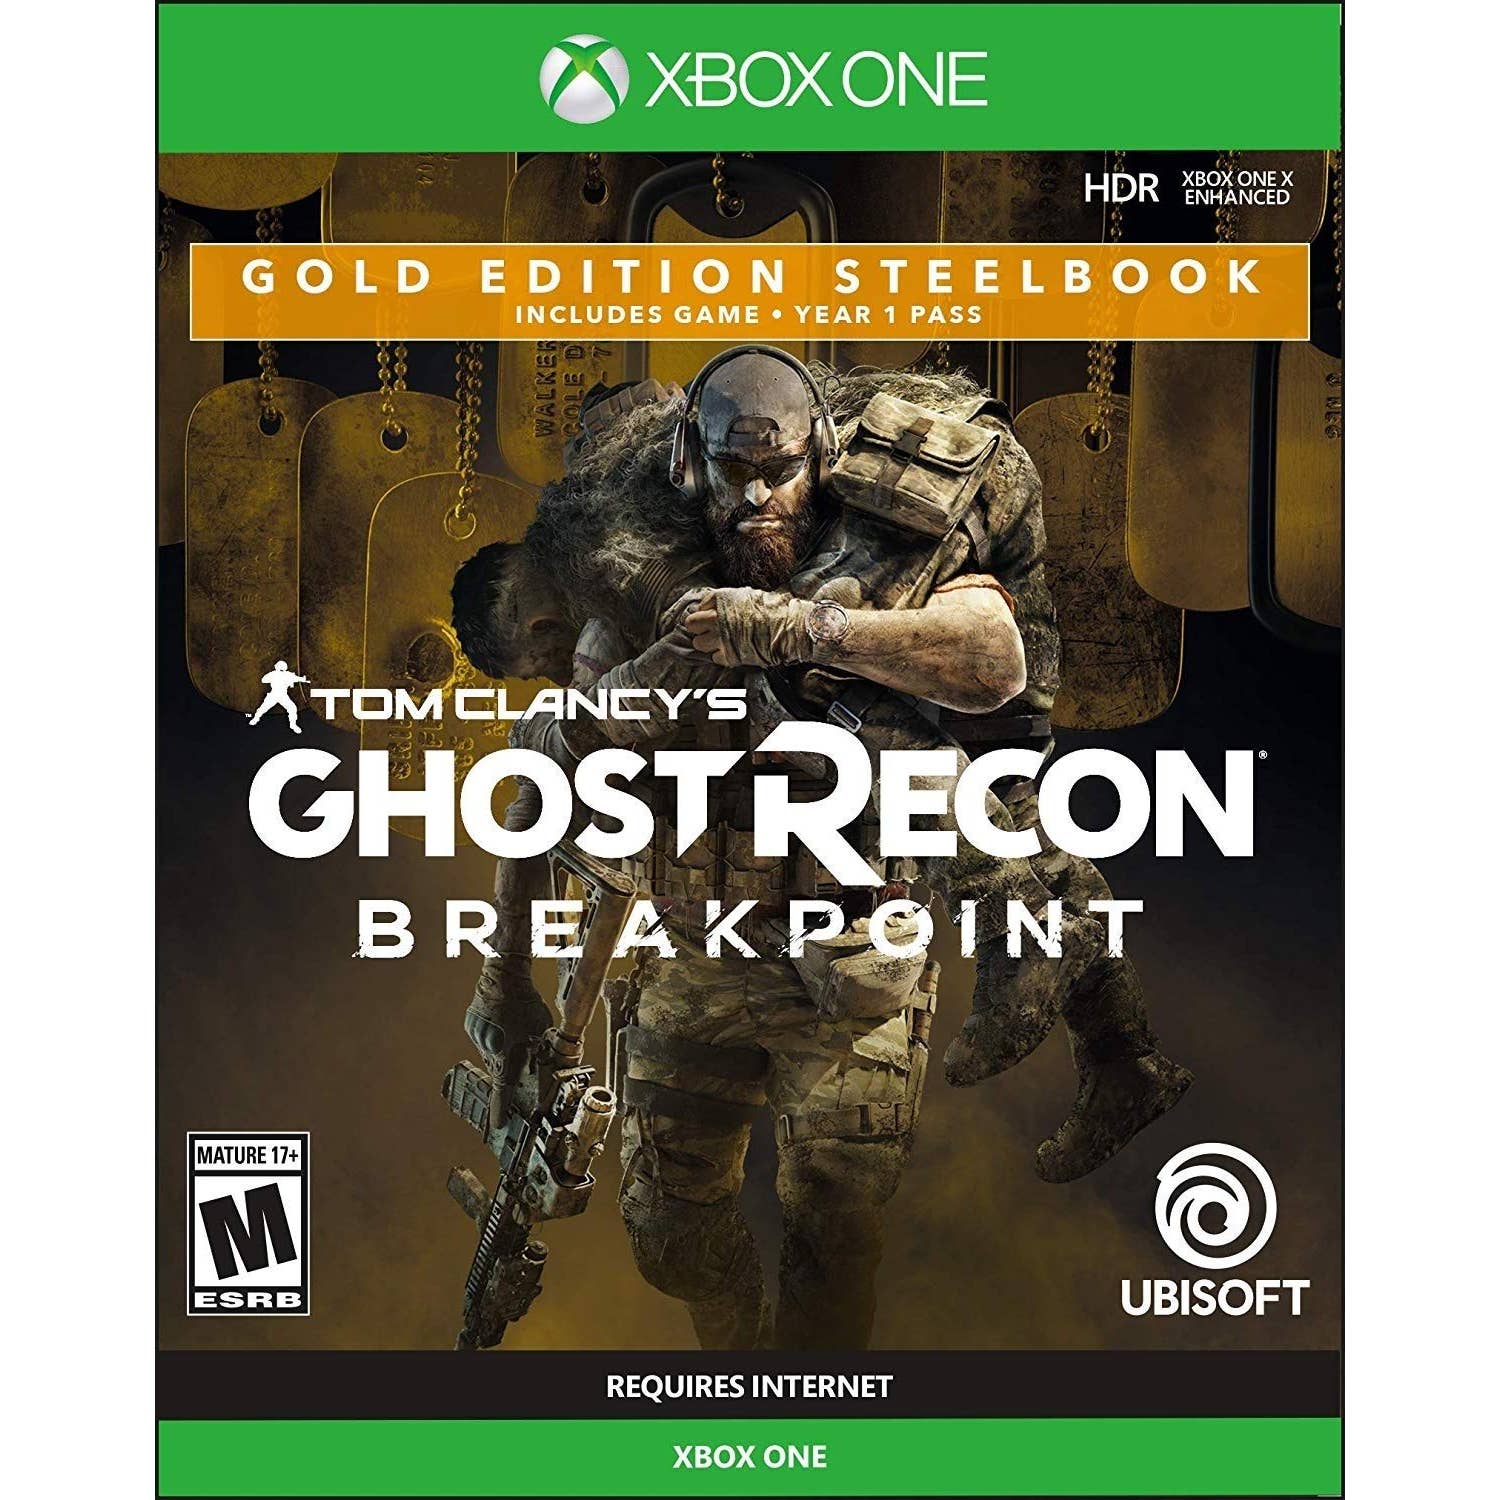 Ubisoft- UBP50422225 Tom Clancy's Ghost Recon Breakpoint Steelbook Gold Edition - Xbox One